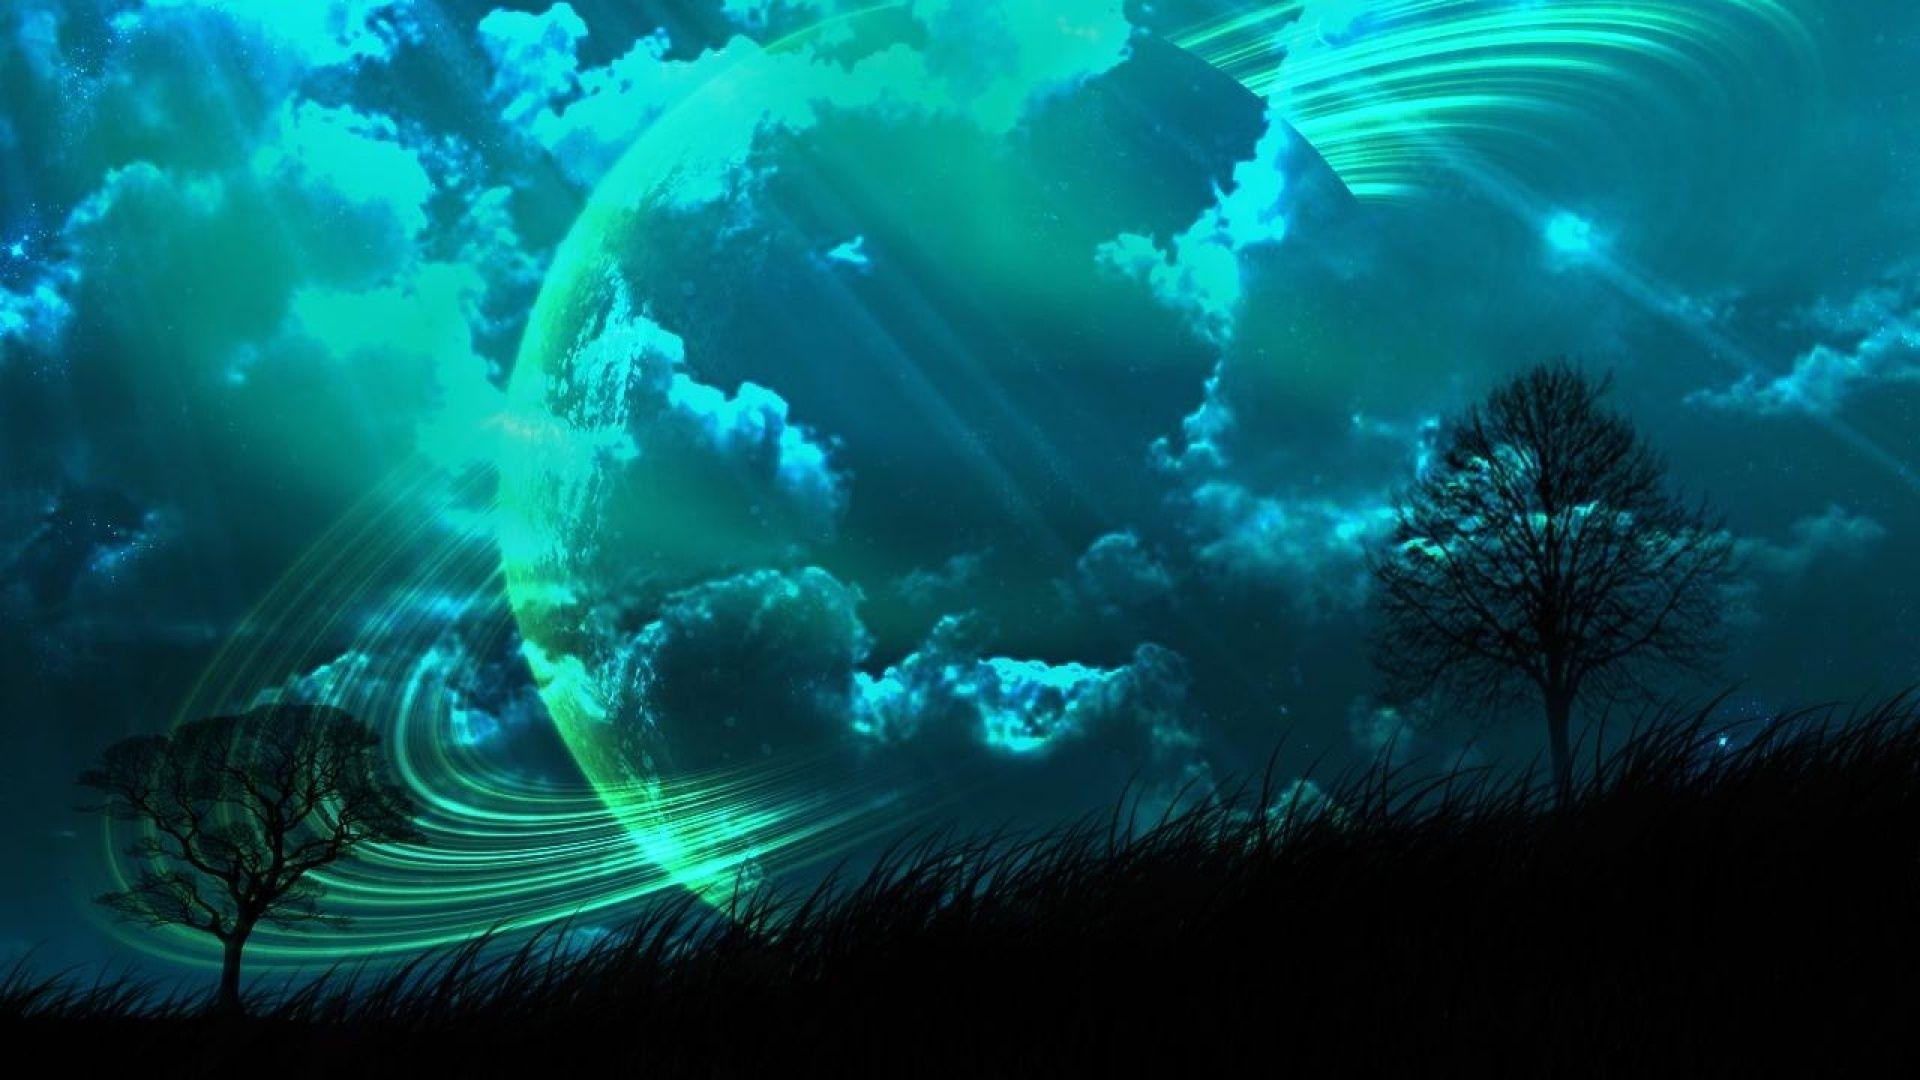 Abstract Planet Dark Nature Teal Wallpaper